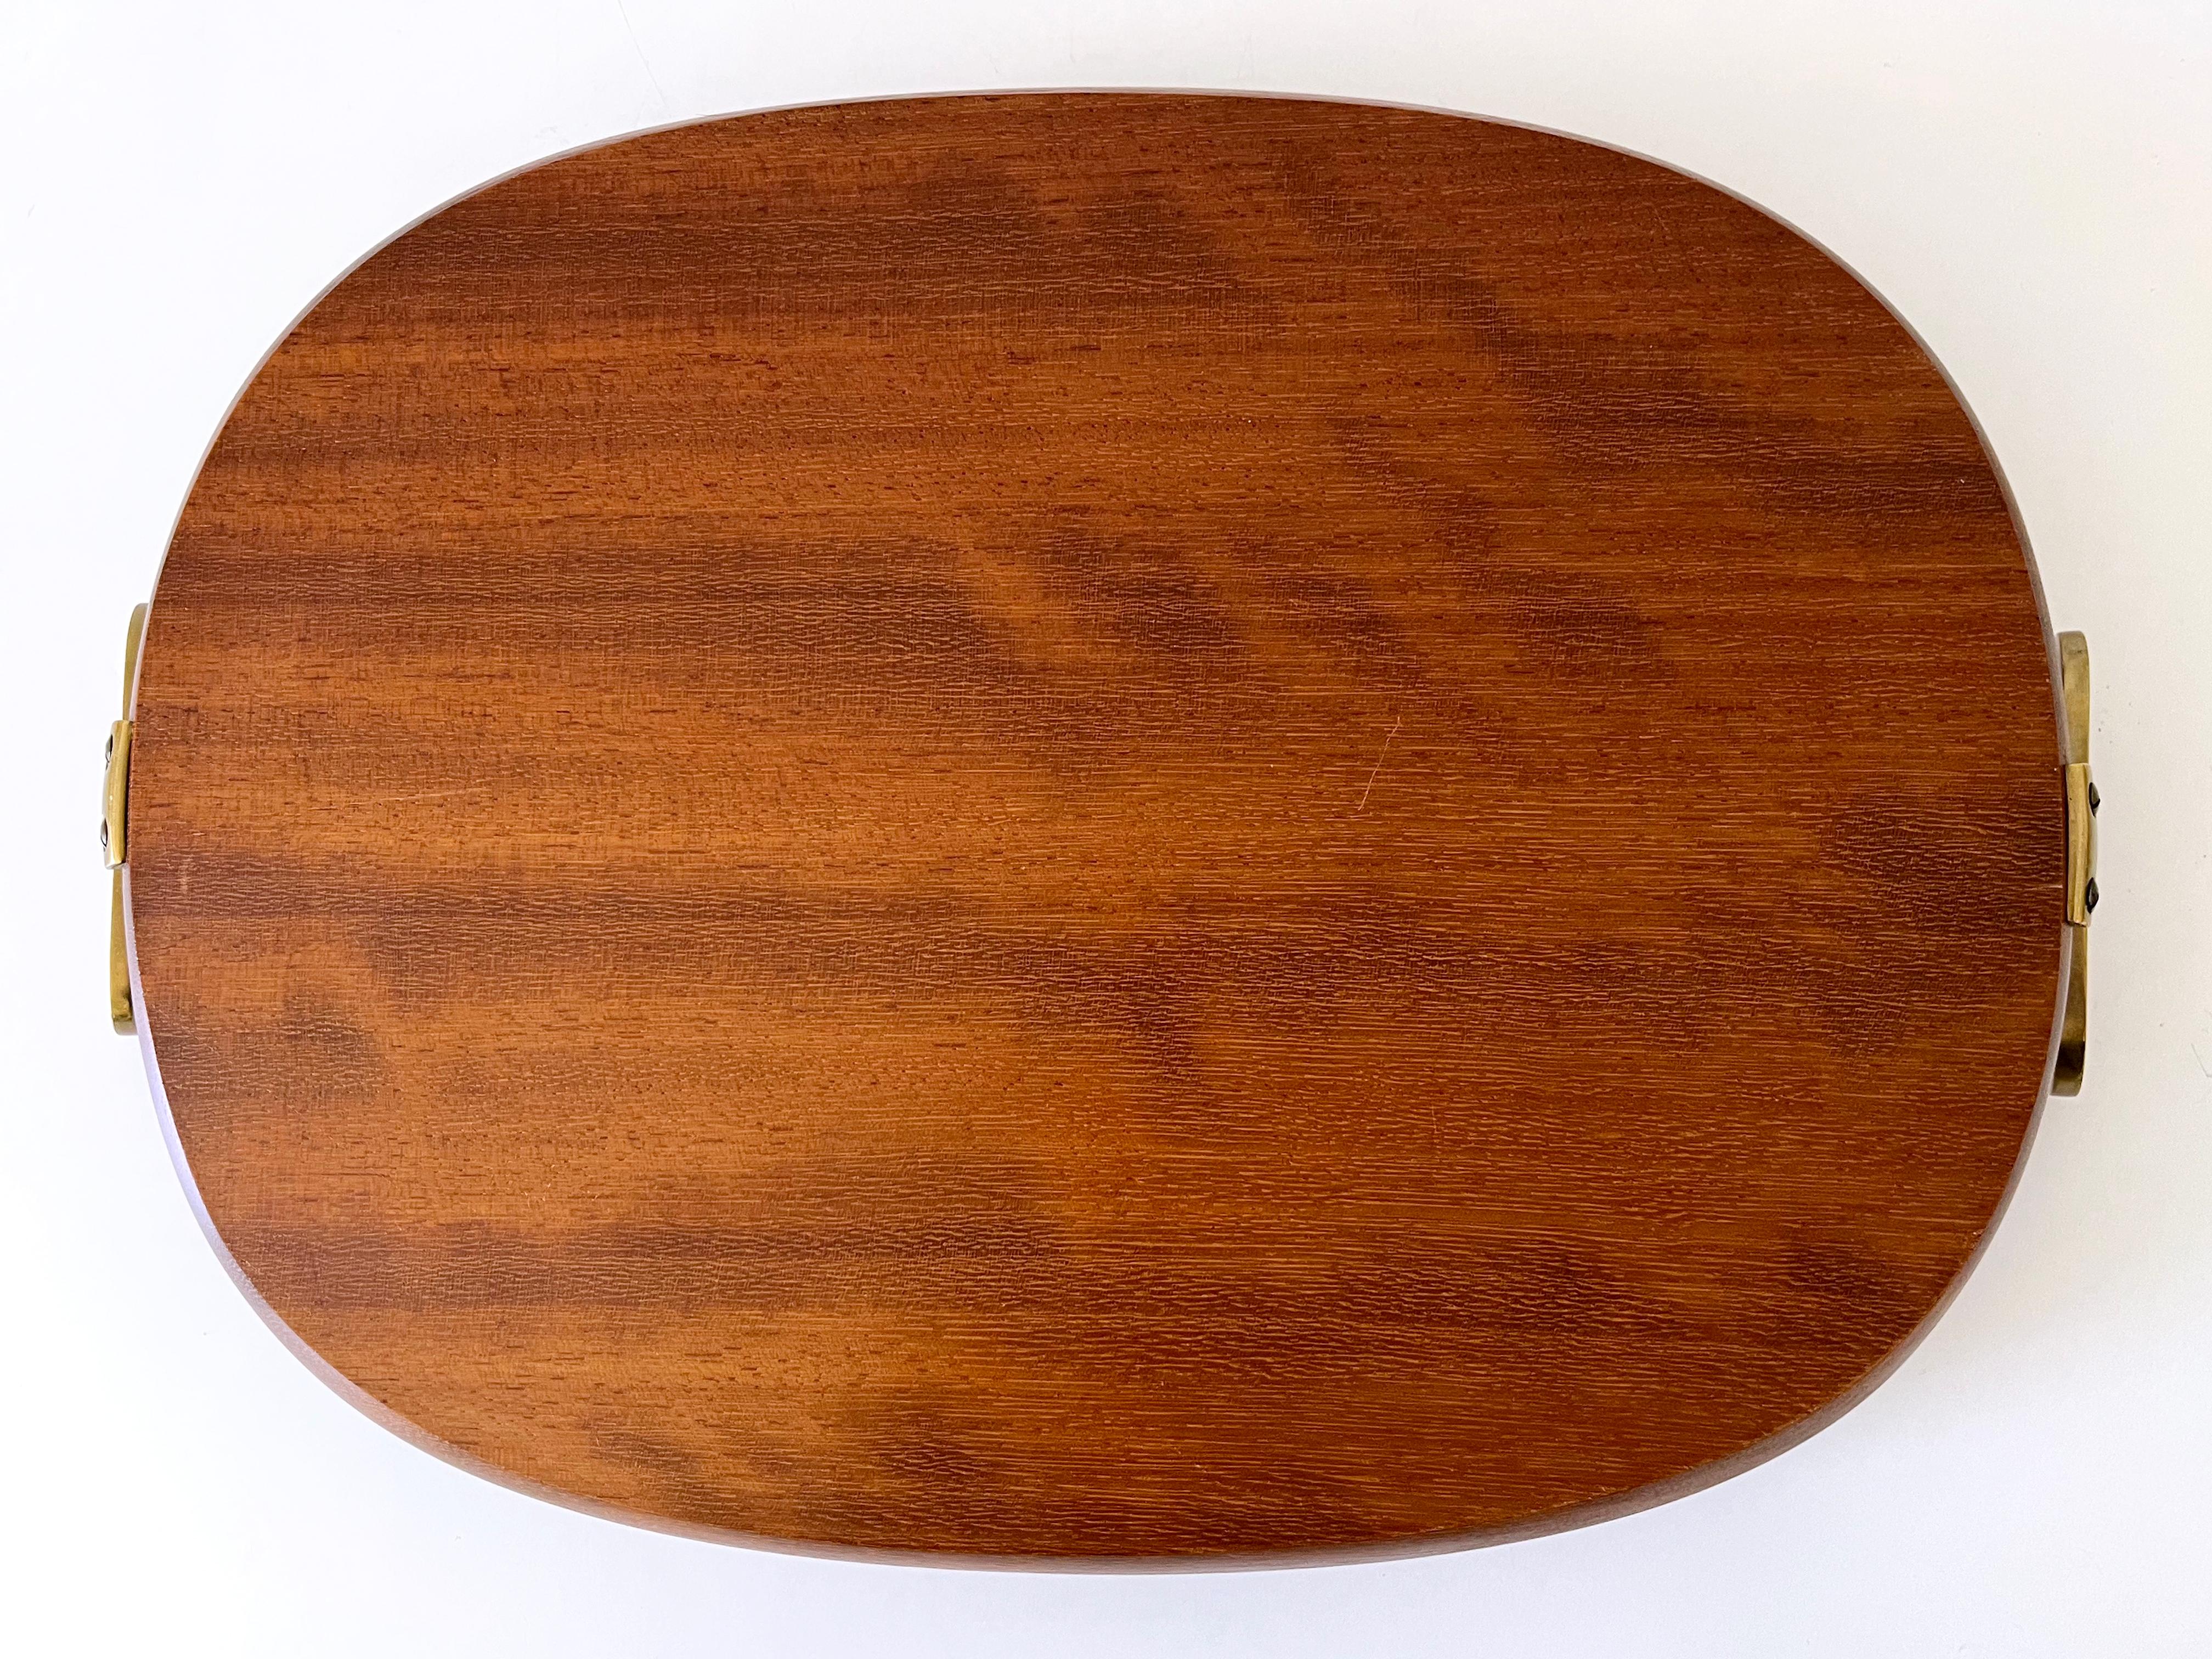 Extremely Rare Mid-Century Modern Teak Serving Tray by Carl Auböck Austria 1950s For Sale 11